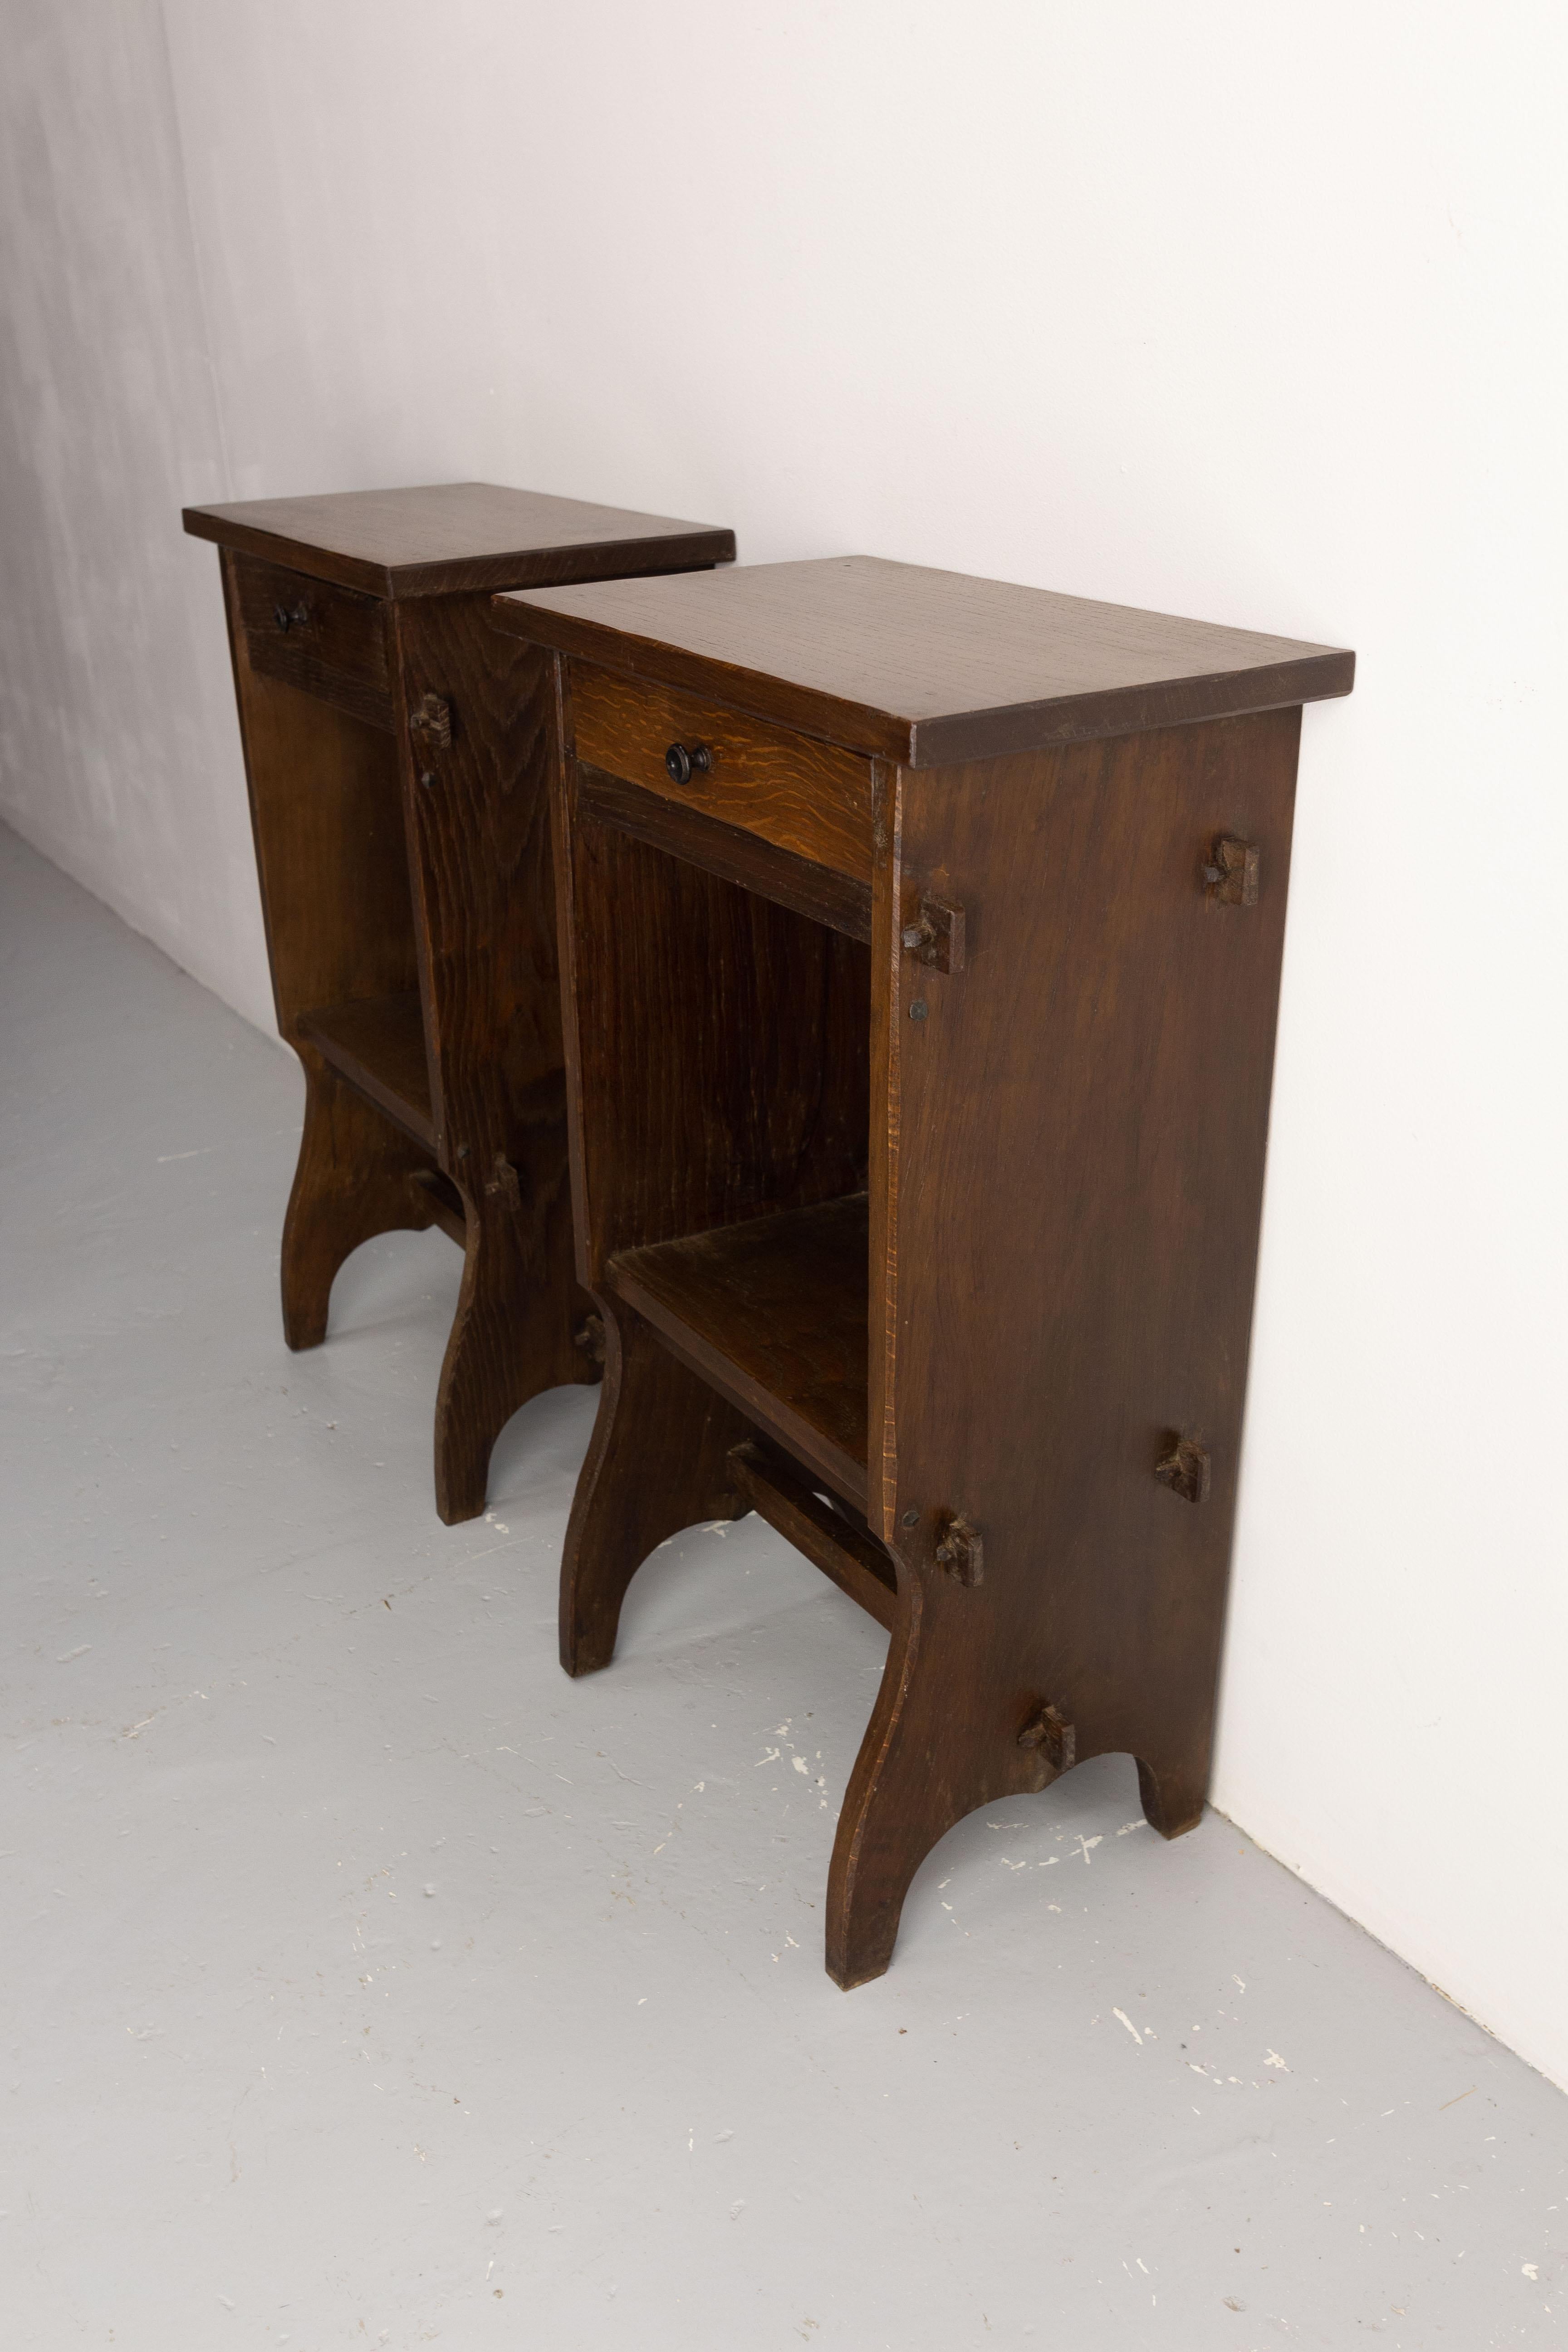 Mid-20th Century French Pair of Nightstands Side Cabinets Bedside Tables Brutalist, C. 1940